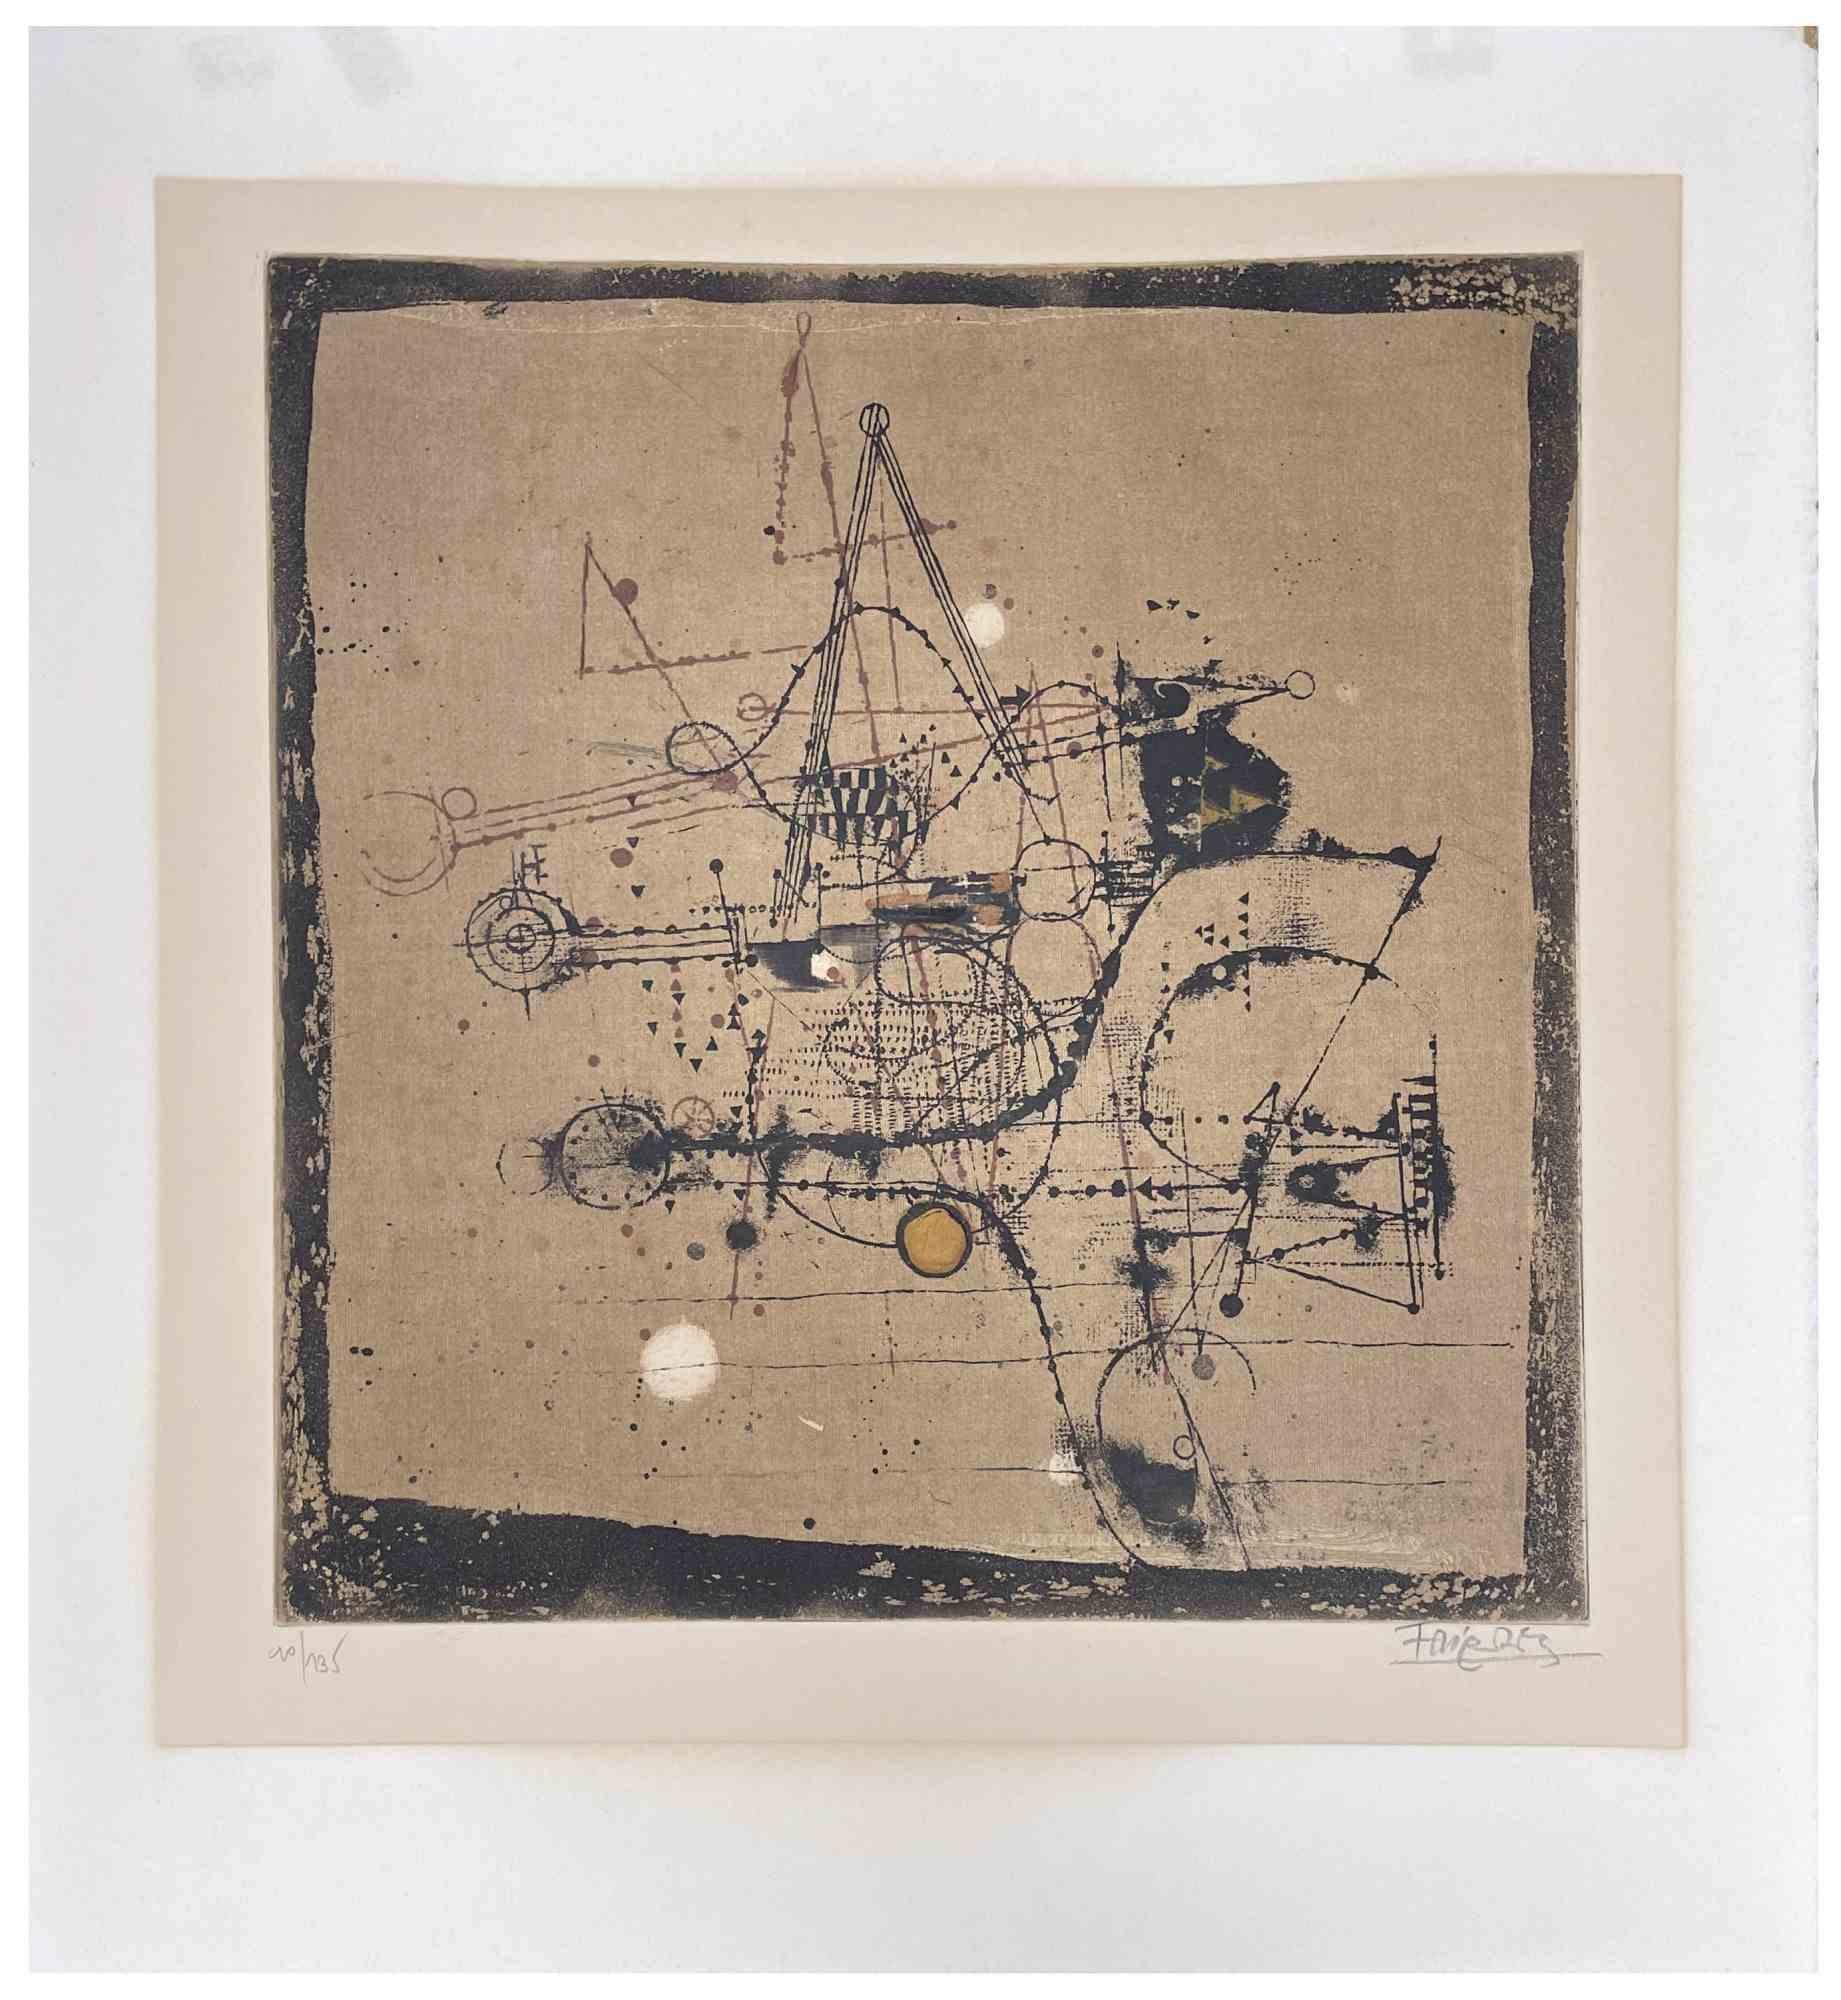 Johnny Friedlaenderin Abstract Print - Untitled - Etching by Johnny Friedlaender - 1970s